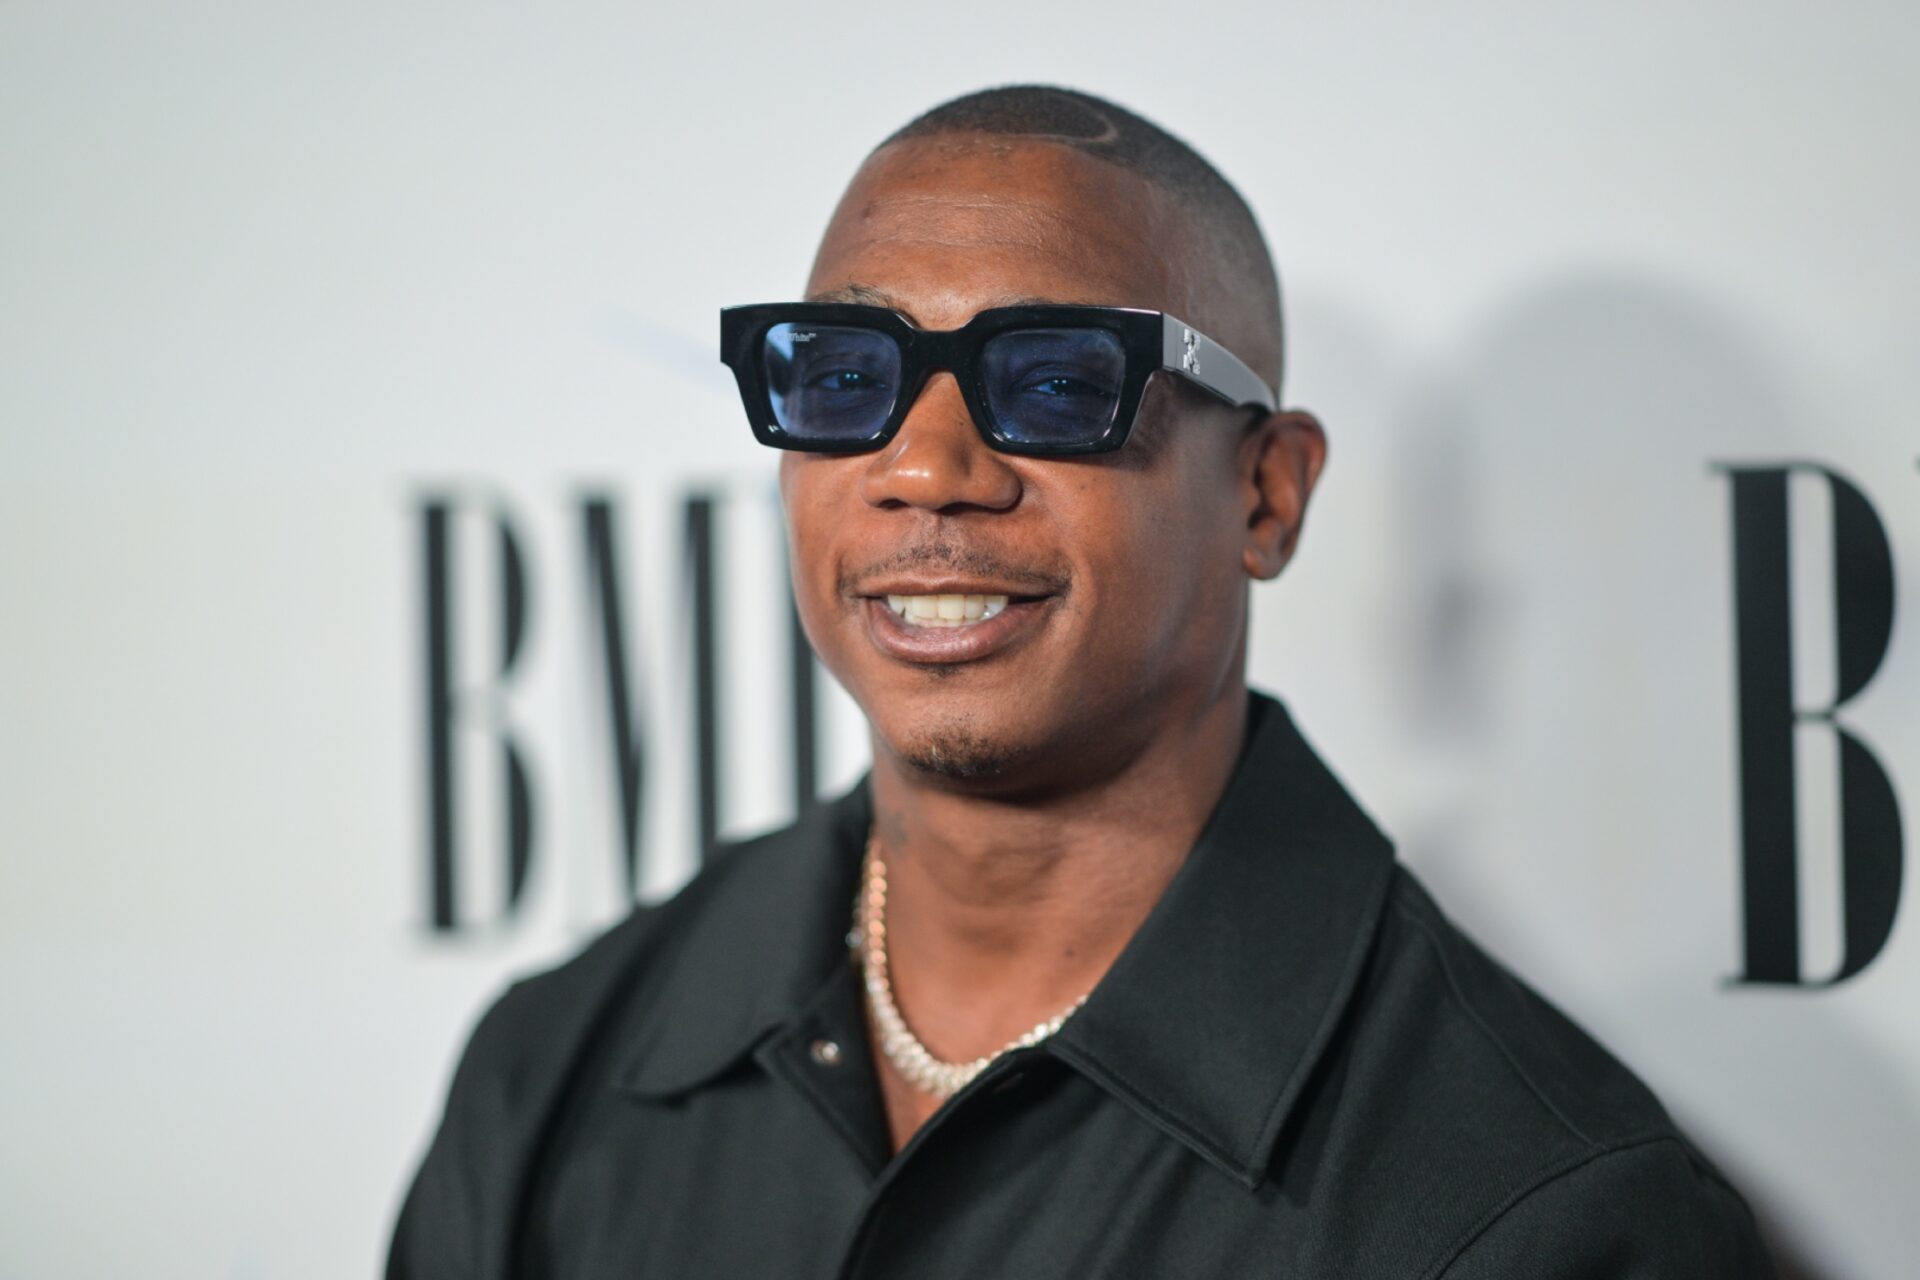 Uk Authorities Deny Ja Rule Entry Ahead Of Scheduled Tour, Yours Truly, Hugo Boss, February 29, 2024